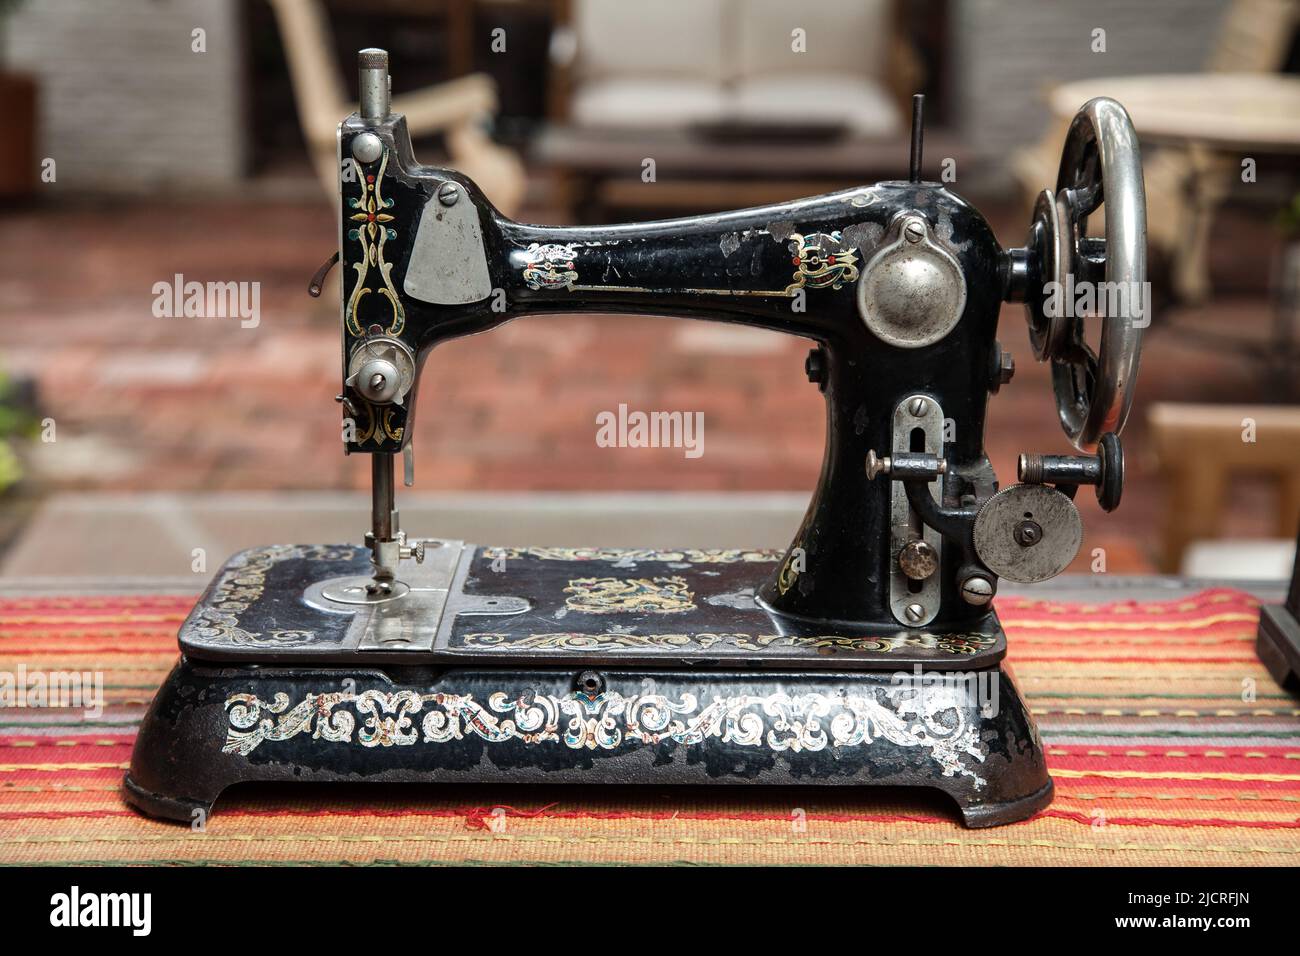 Antiques - Exhibition of an old sewing machine. Stock Photo